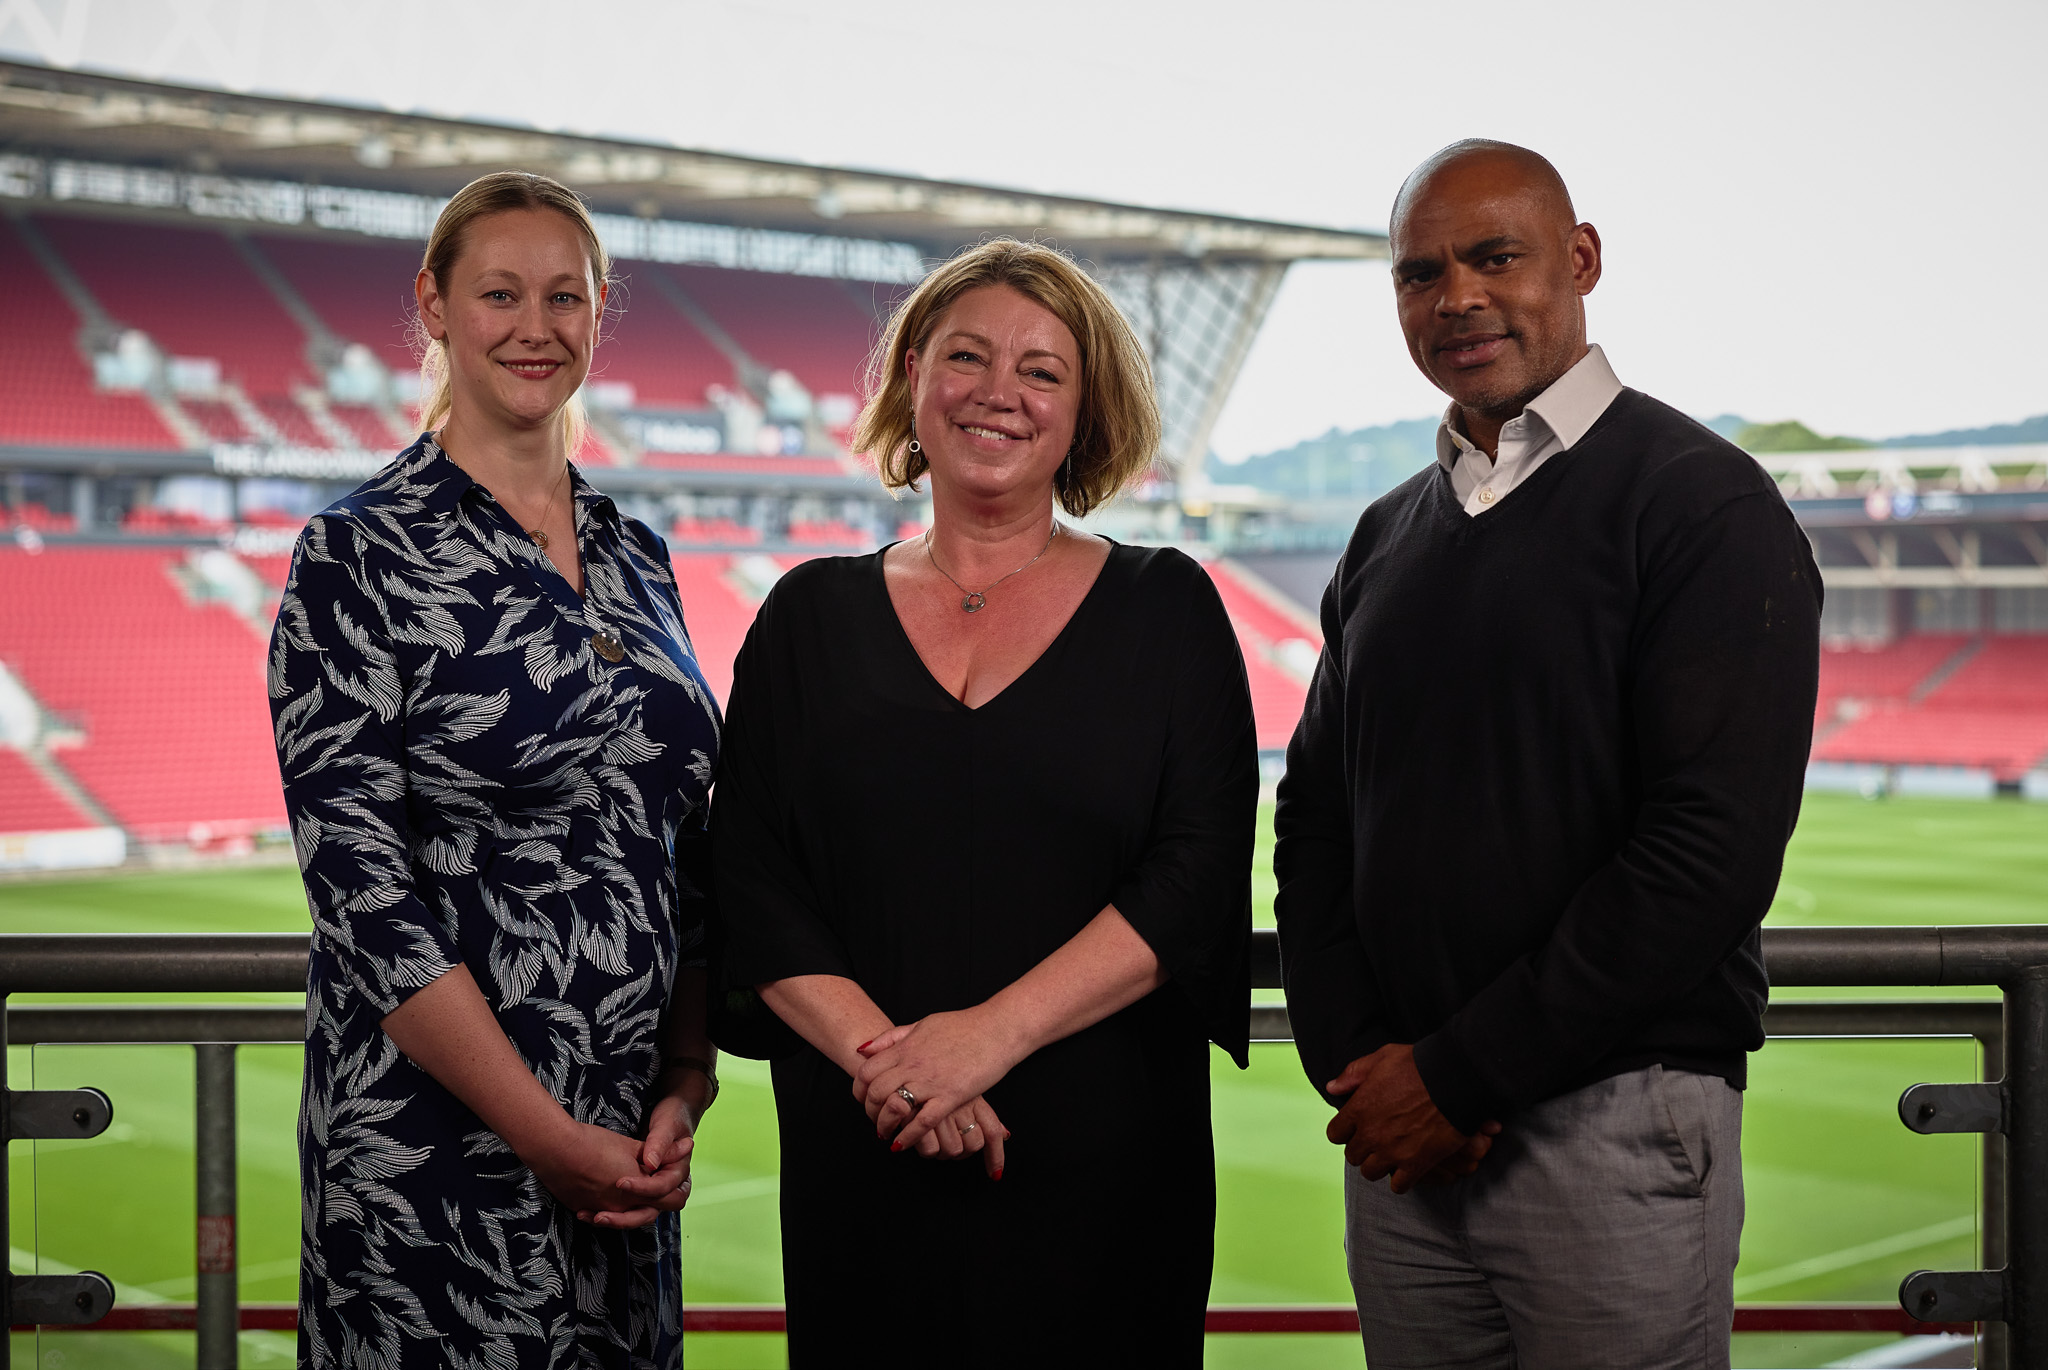 Jenny Hutchinson, Kathryn Davis and Marvin Rees credit: Ashton Gate / Fever Pitch